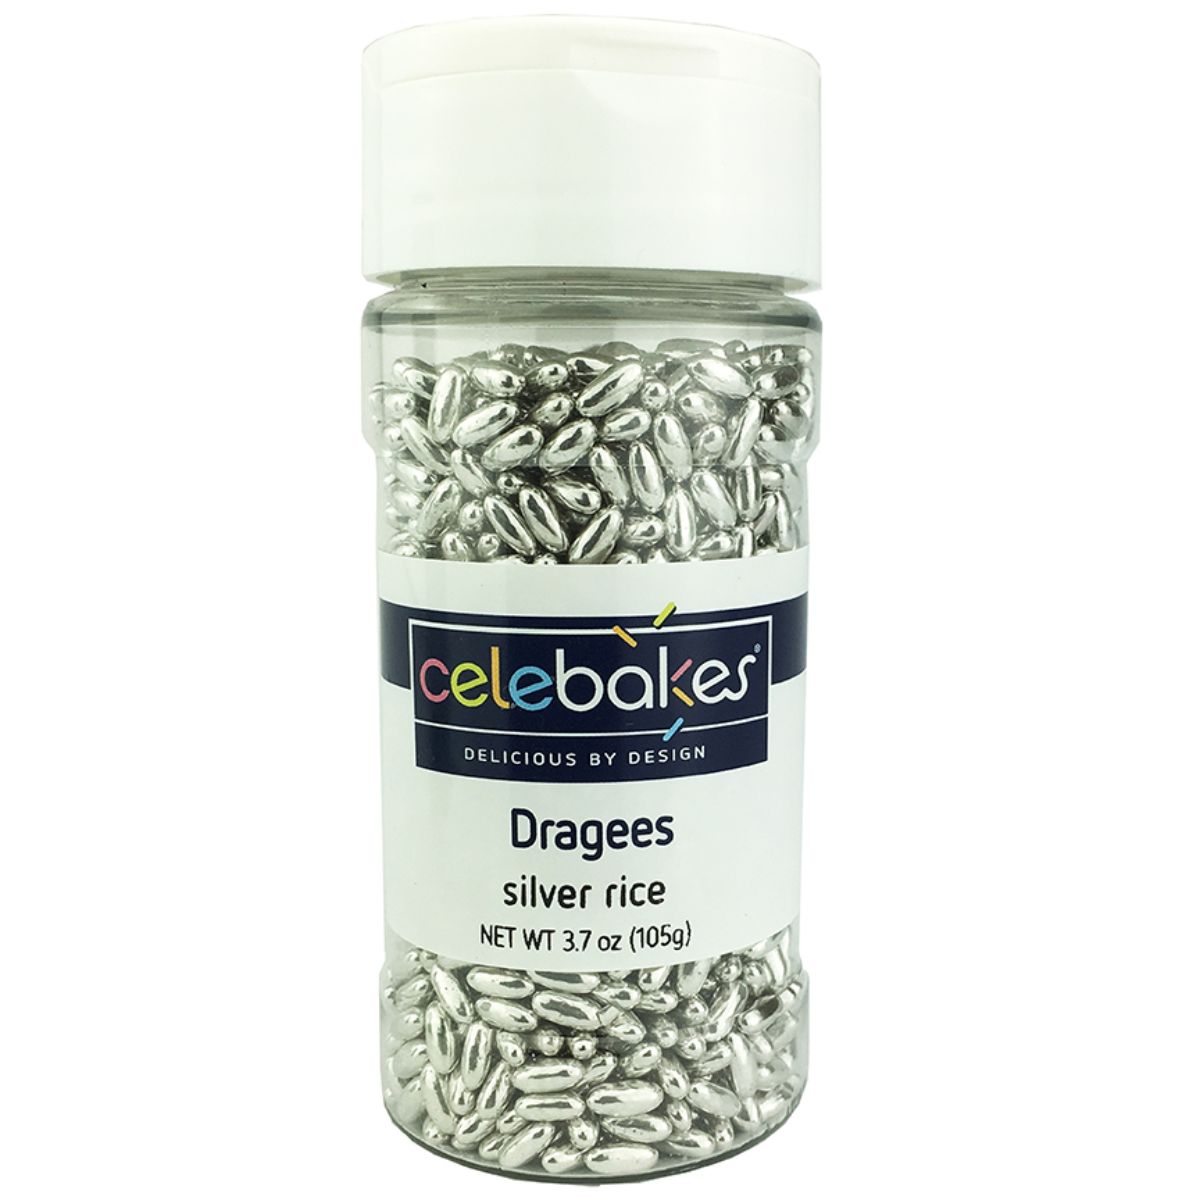 CK Dragees Silver Rice 3.7oz